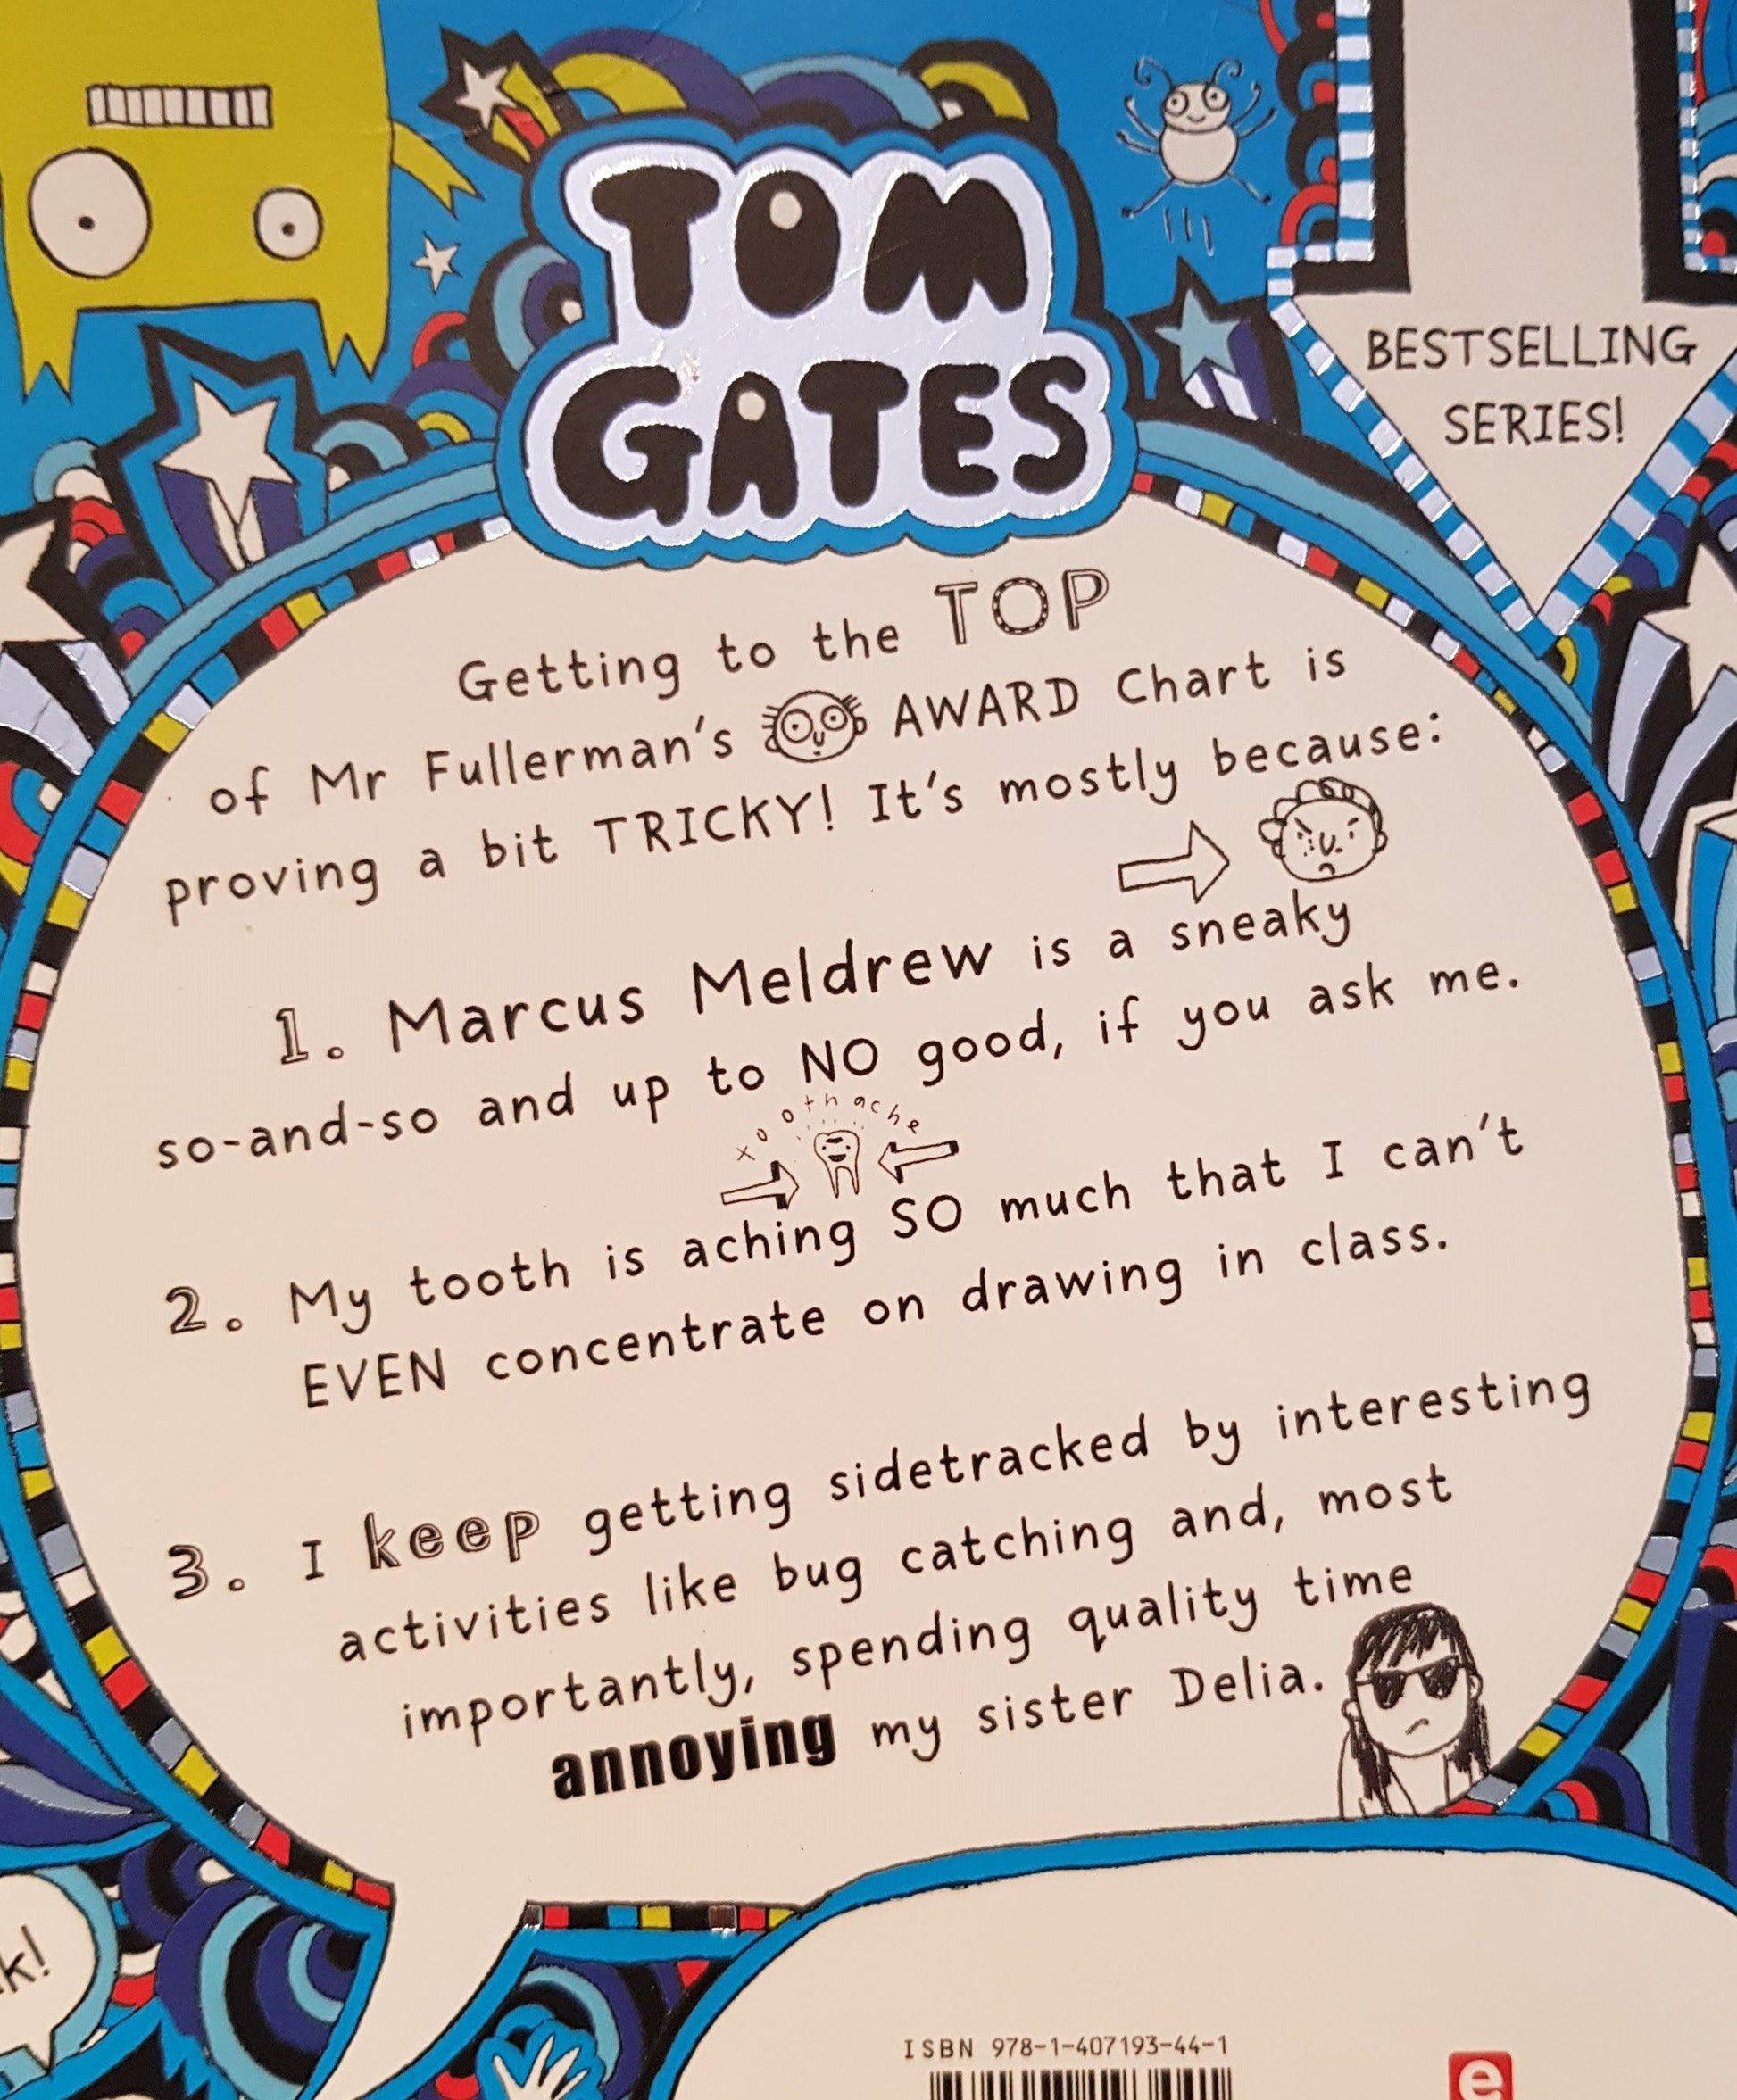 Excellent excuses Like New Tom Gates  (4625105551415)